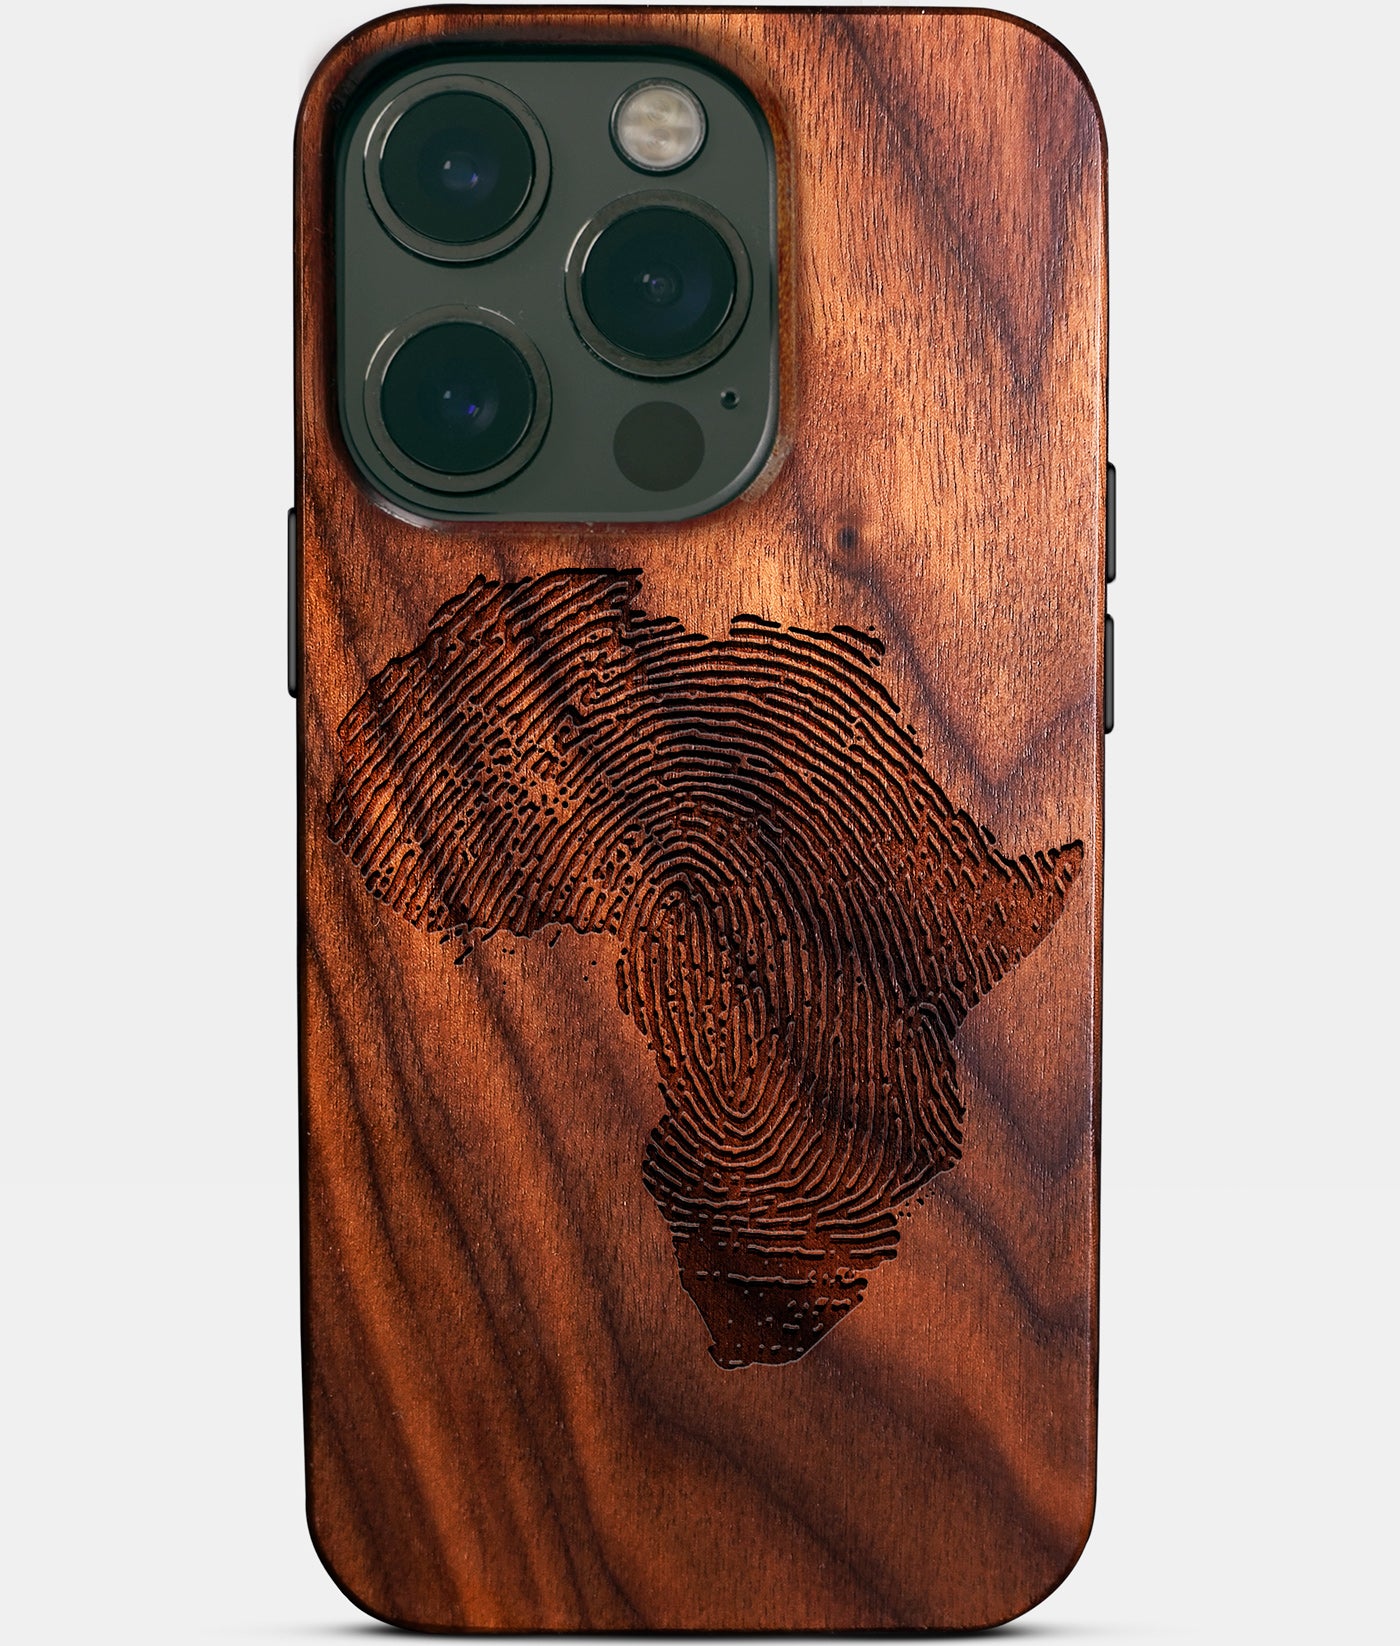 Africa Fingerprint Shape Wood iPhone 14 Pro Case - HBCU Gear College Graduation Gifts For Black Men And Women Black Owned Gifts 2022 Christmas Gifts - African American Black Owned Businesses iPhone 14 Pro Cover In Los Angeles 2022 Custom Gifts For Personalized Black Men